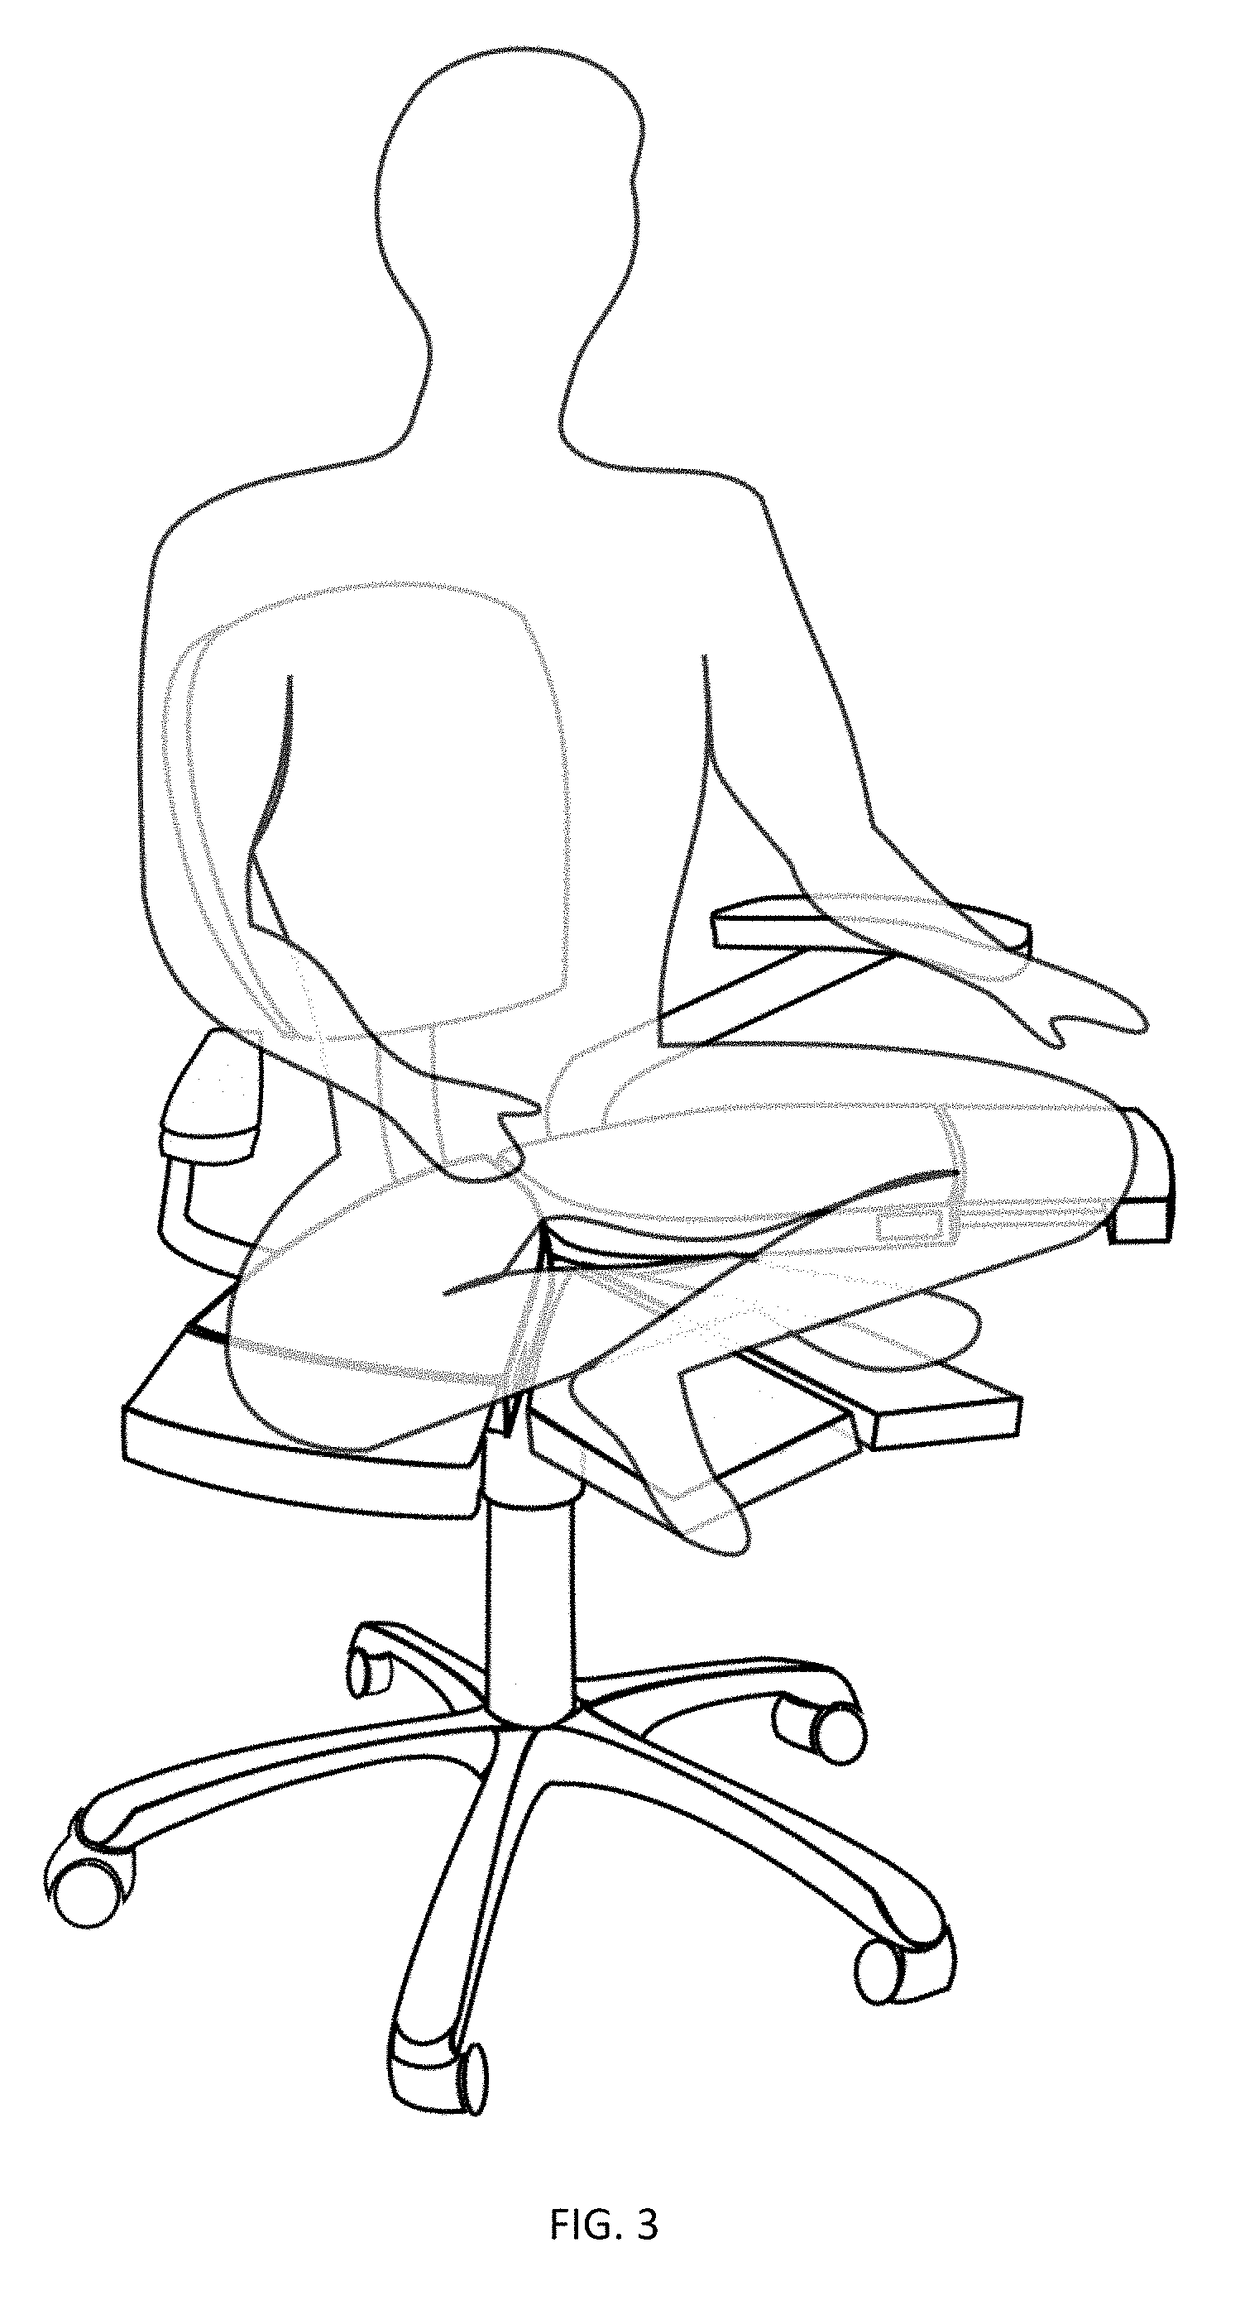 Chair that adapts to multiple sitting positions